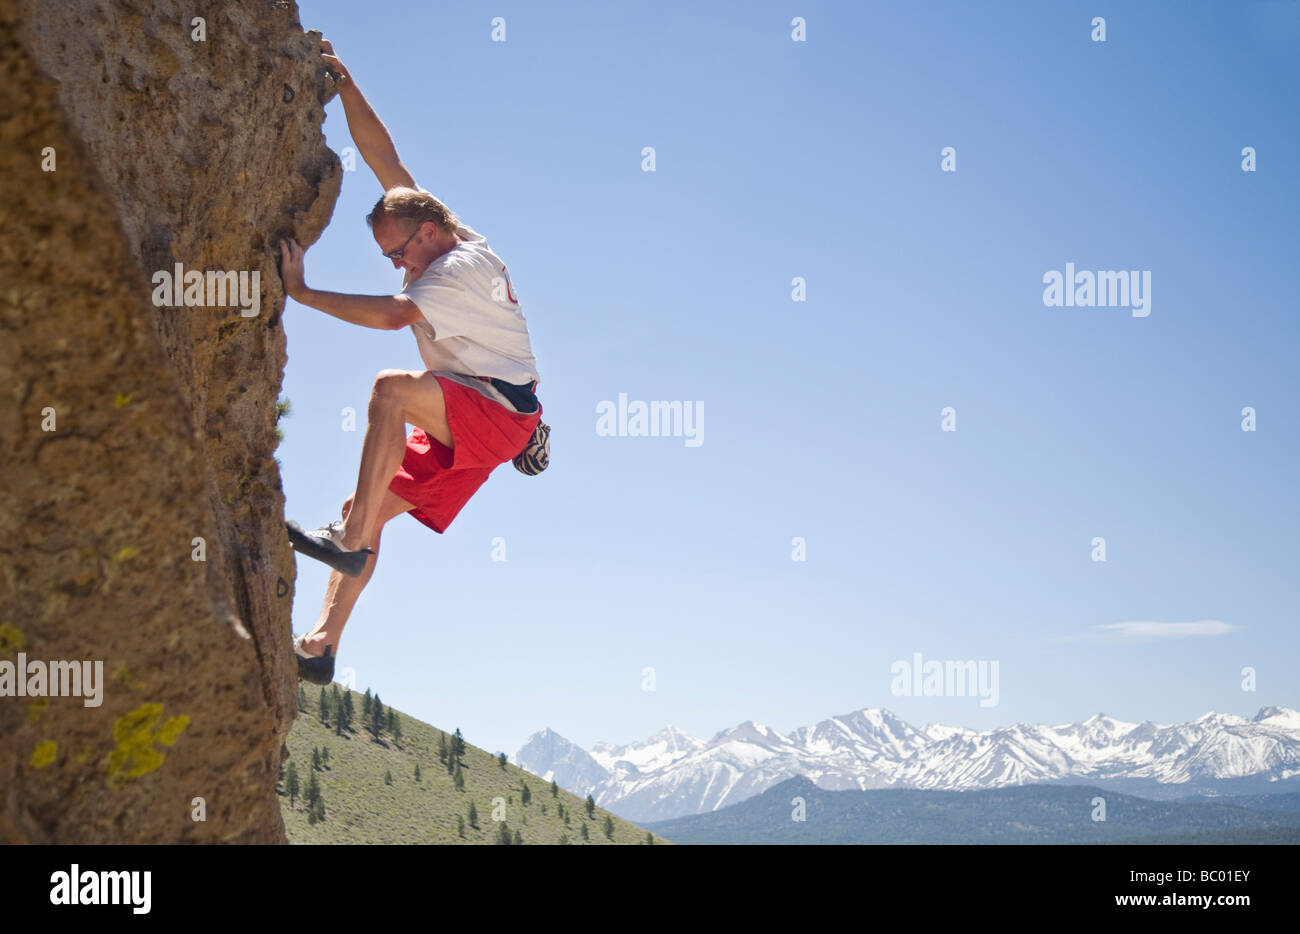 A man solo climbing in the Sierras. Stock Photo